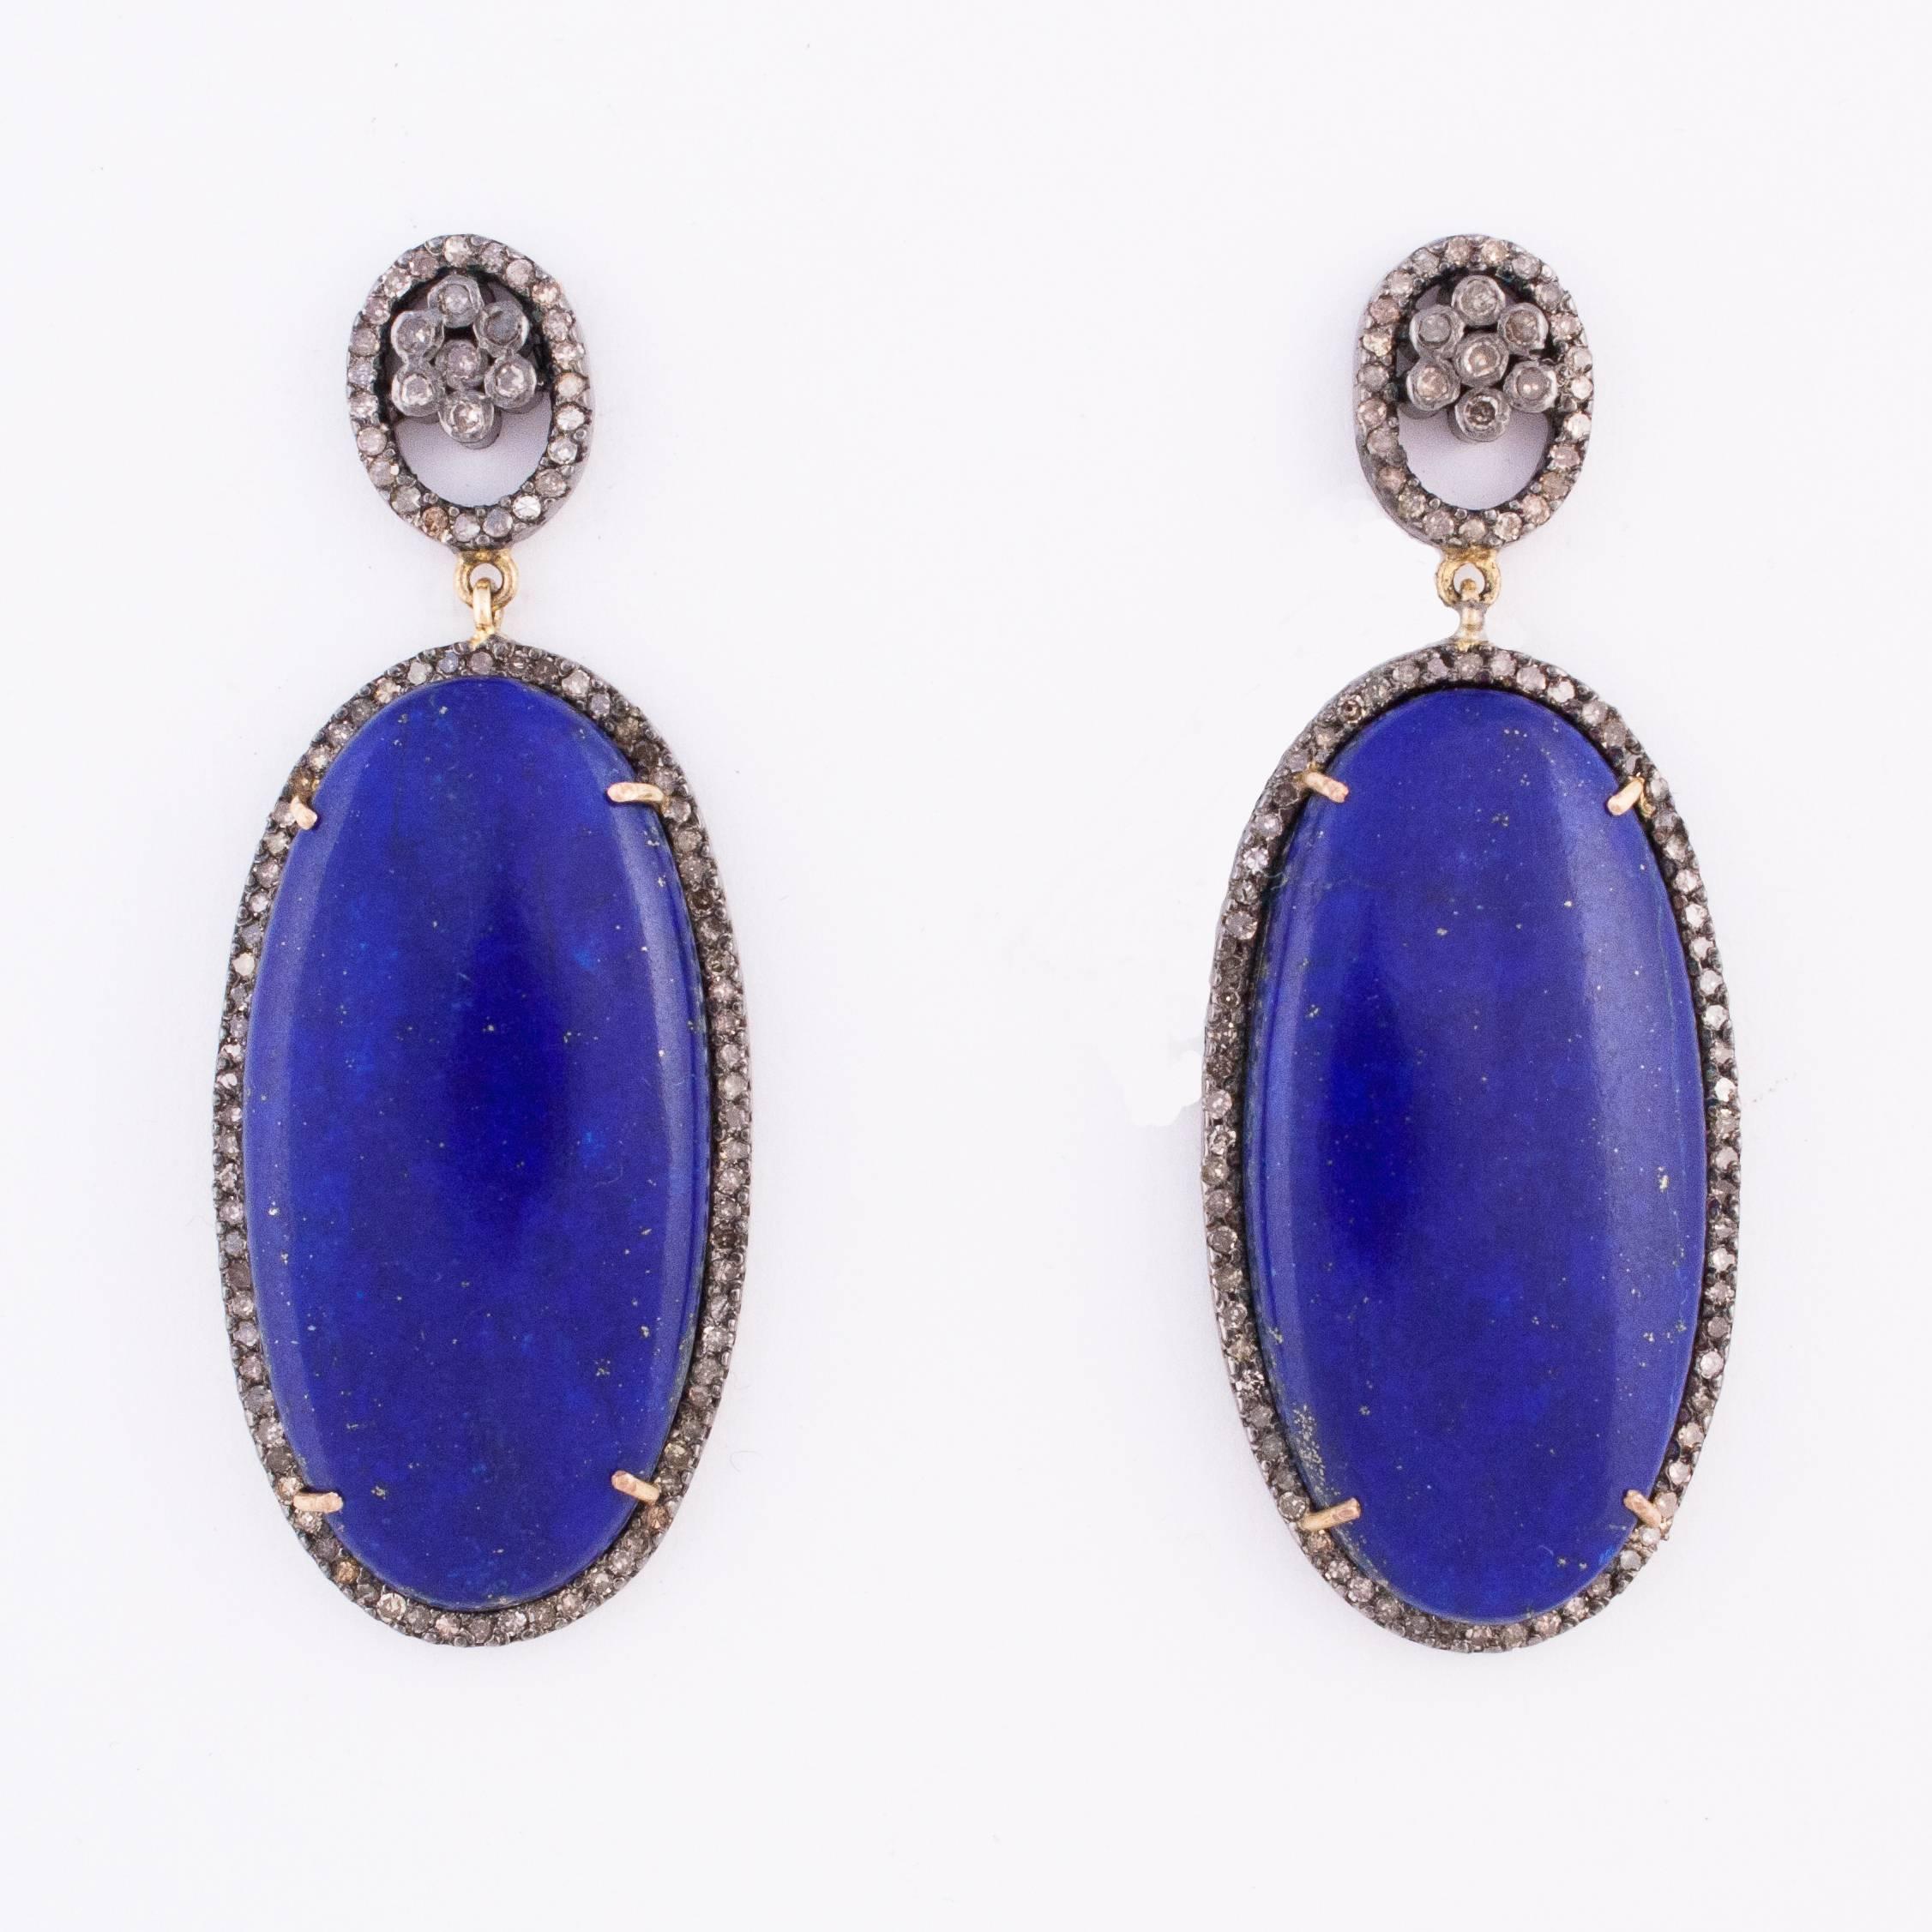 Beautiful cabochon lapis lazuli drop earrings edged with rose cut diamonds set in sterling silver. The earring studs are diamond ovals inset with diamond flowers. Oval shaped lapis measures 1.50